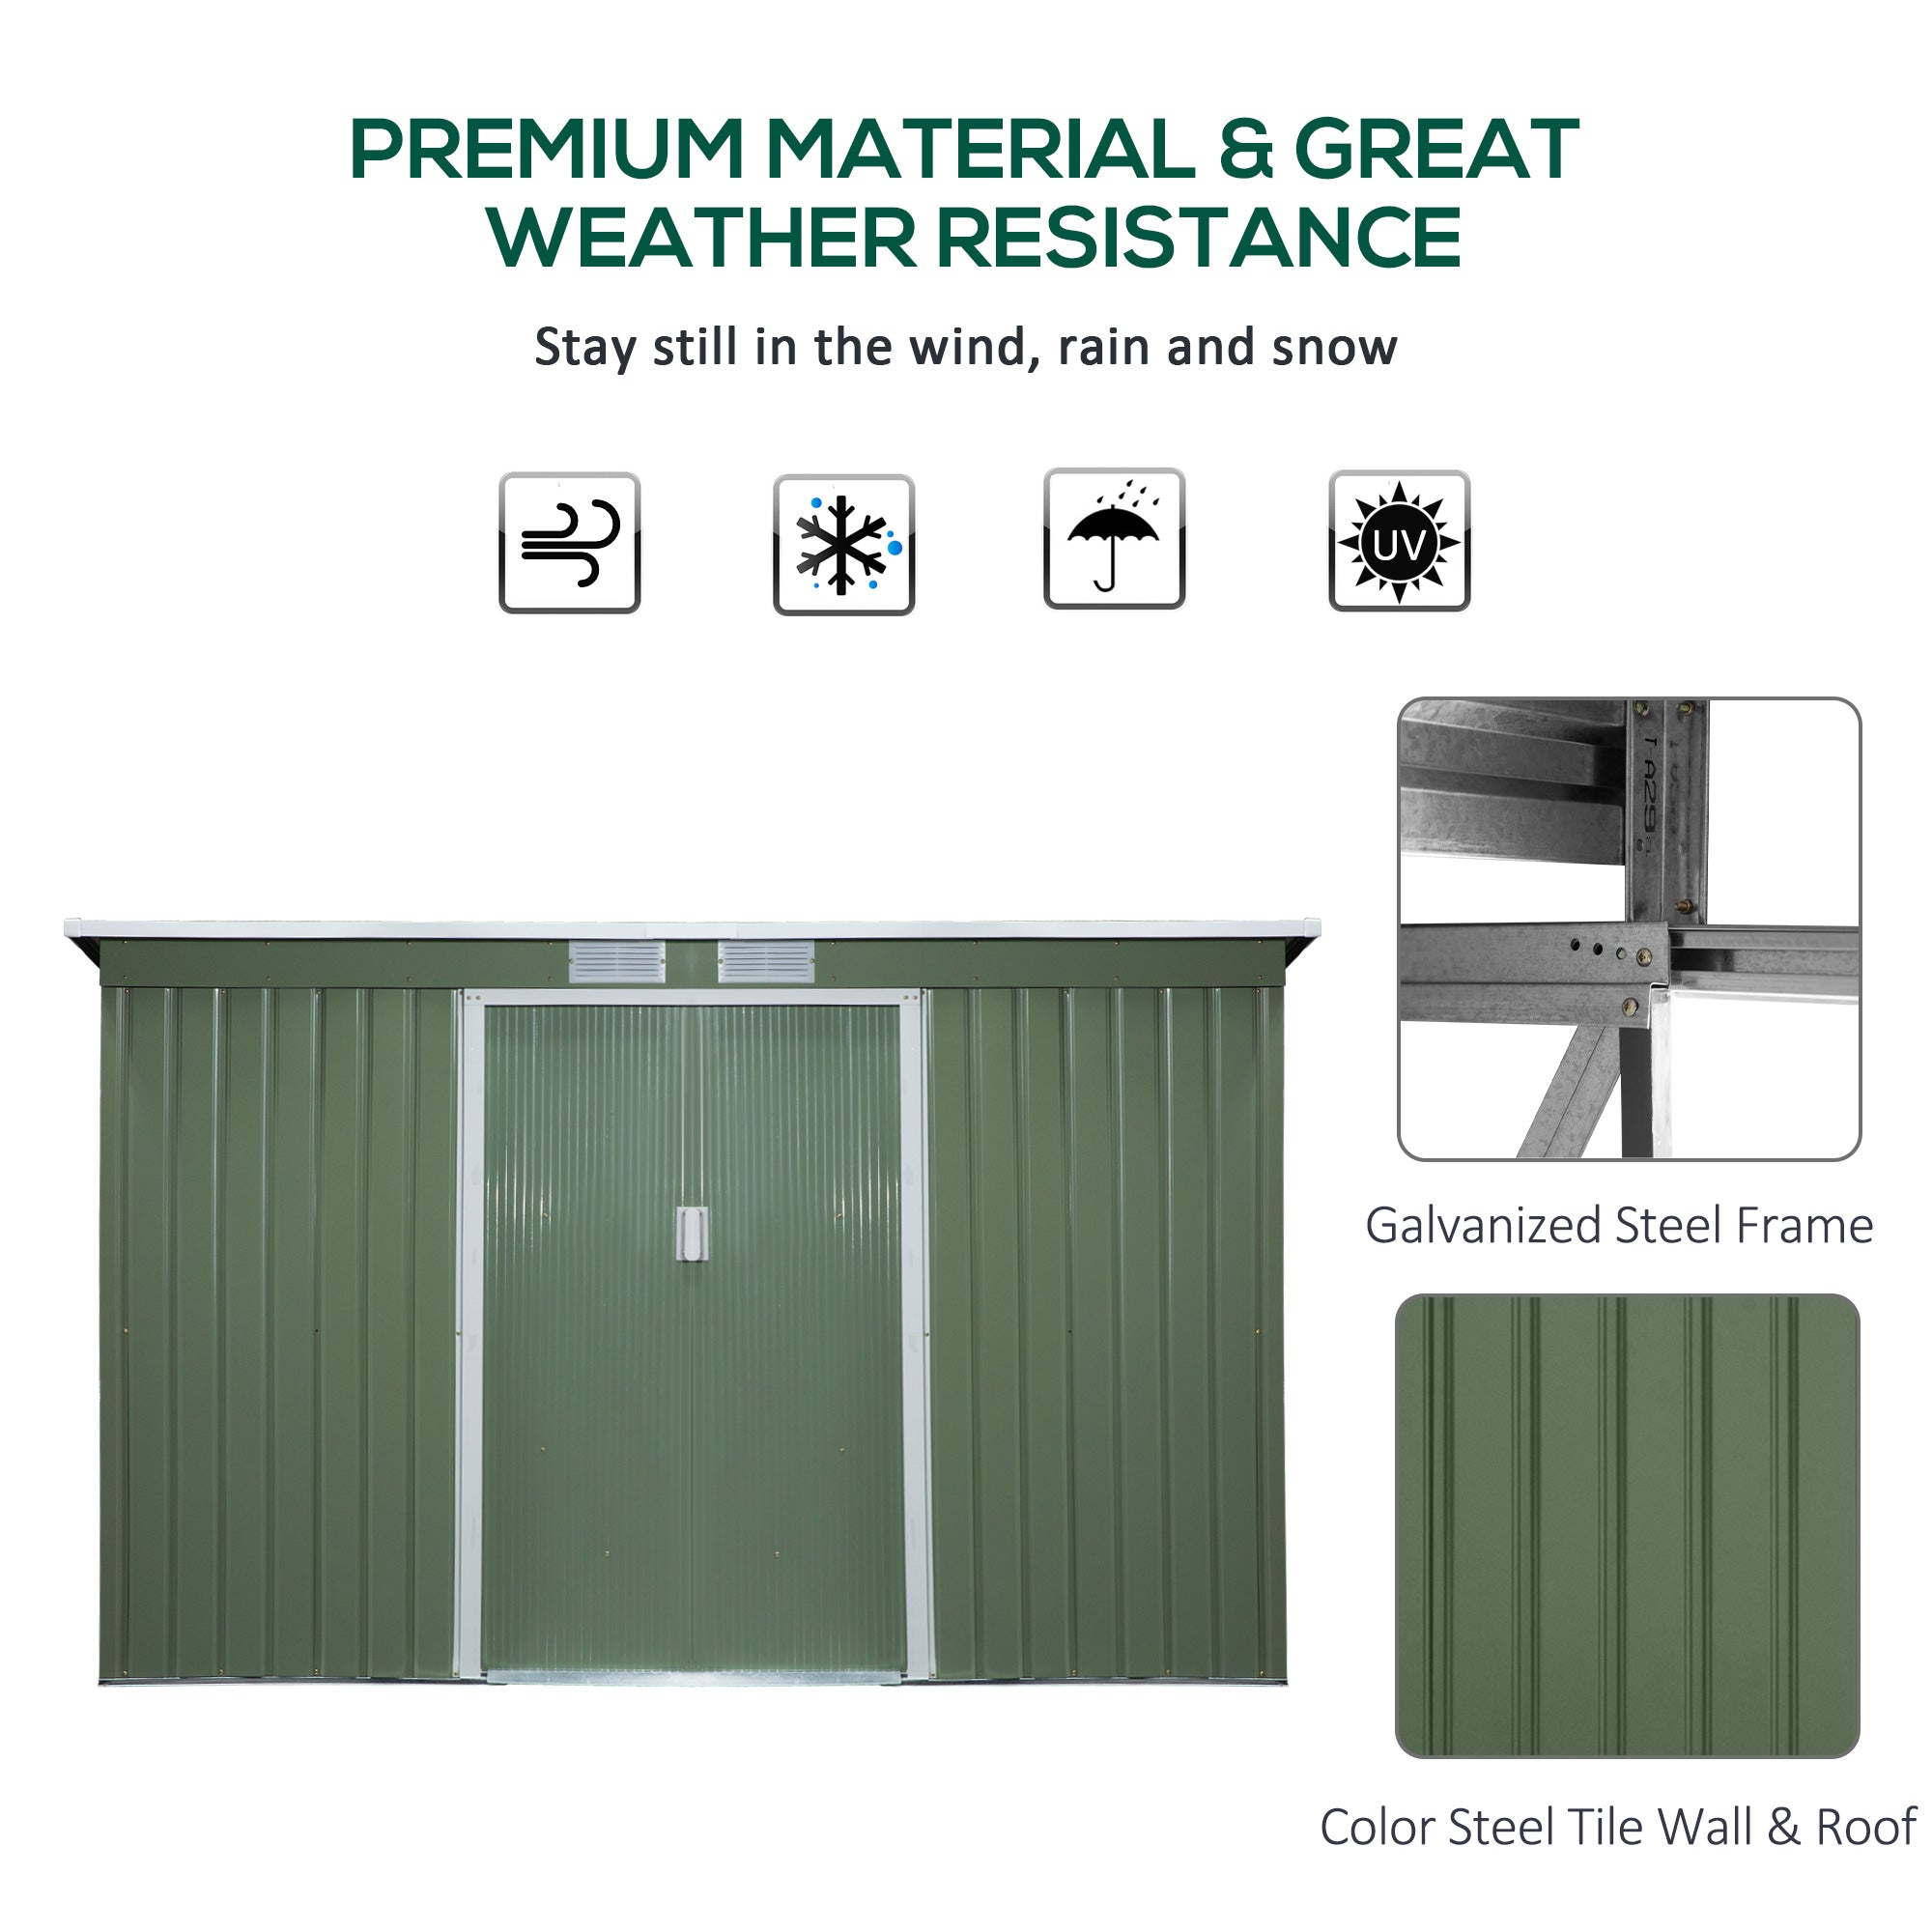 Outsunny 9 x 4.5 ft Pent Roof Metal Garden Storage Shed Corrugated Steel Tool Box with Foundation Ventilation & Doors, Light Green - Inspirely